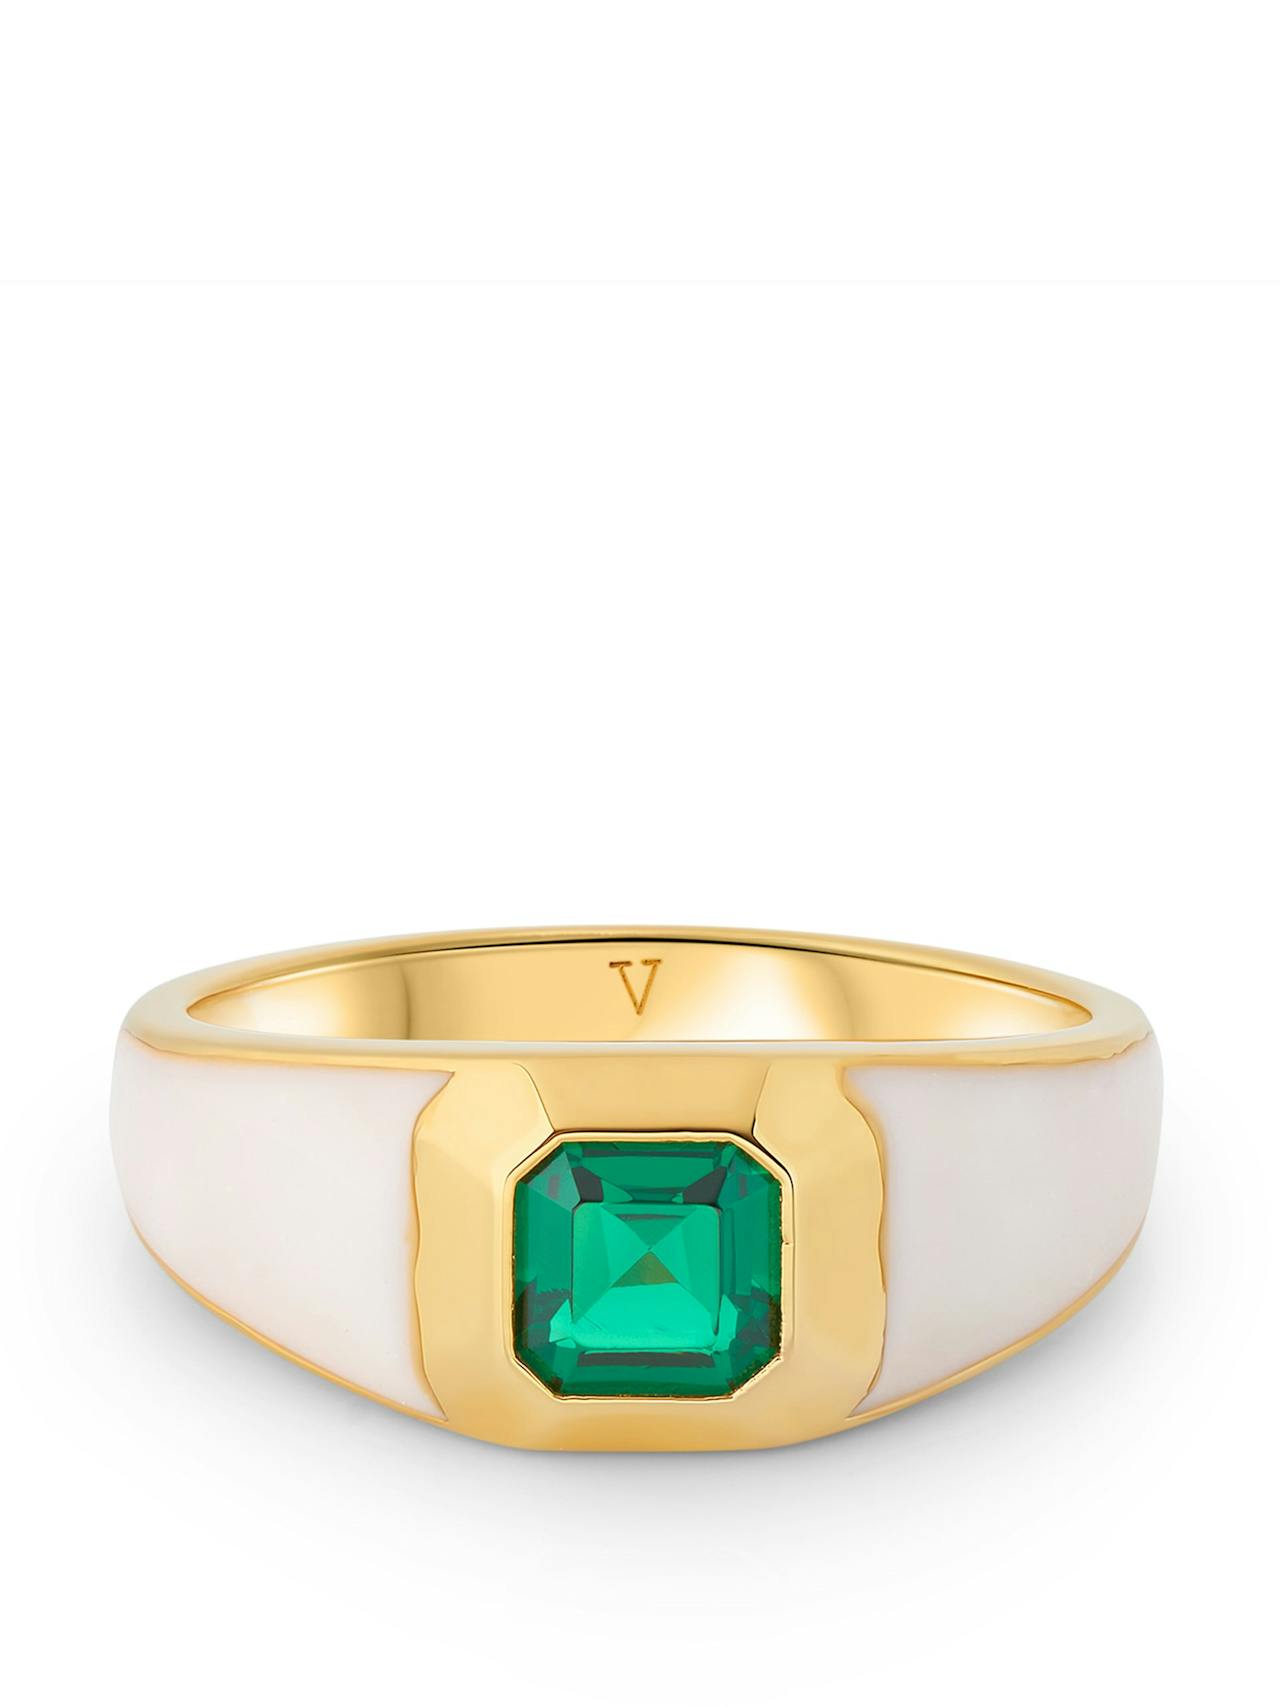 Sophie white enamel signet ring with emerald green stone